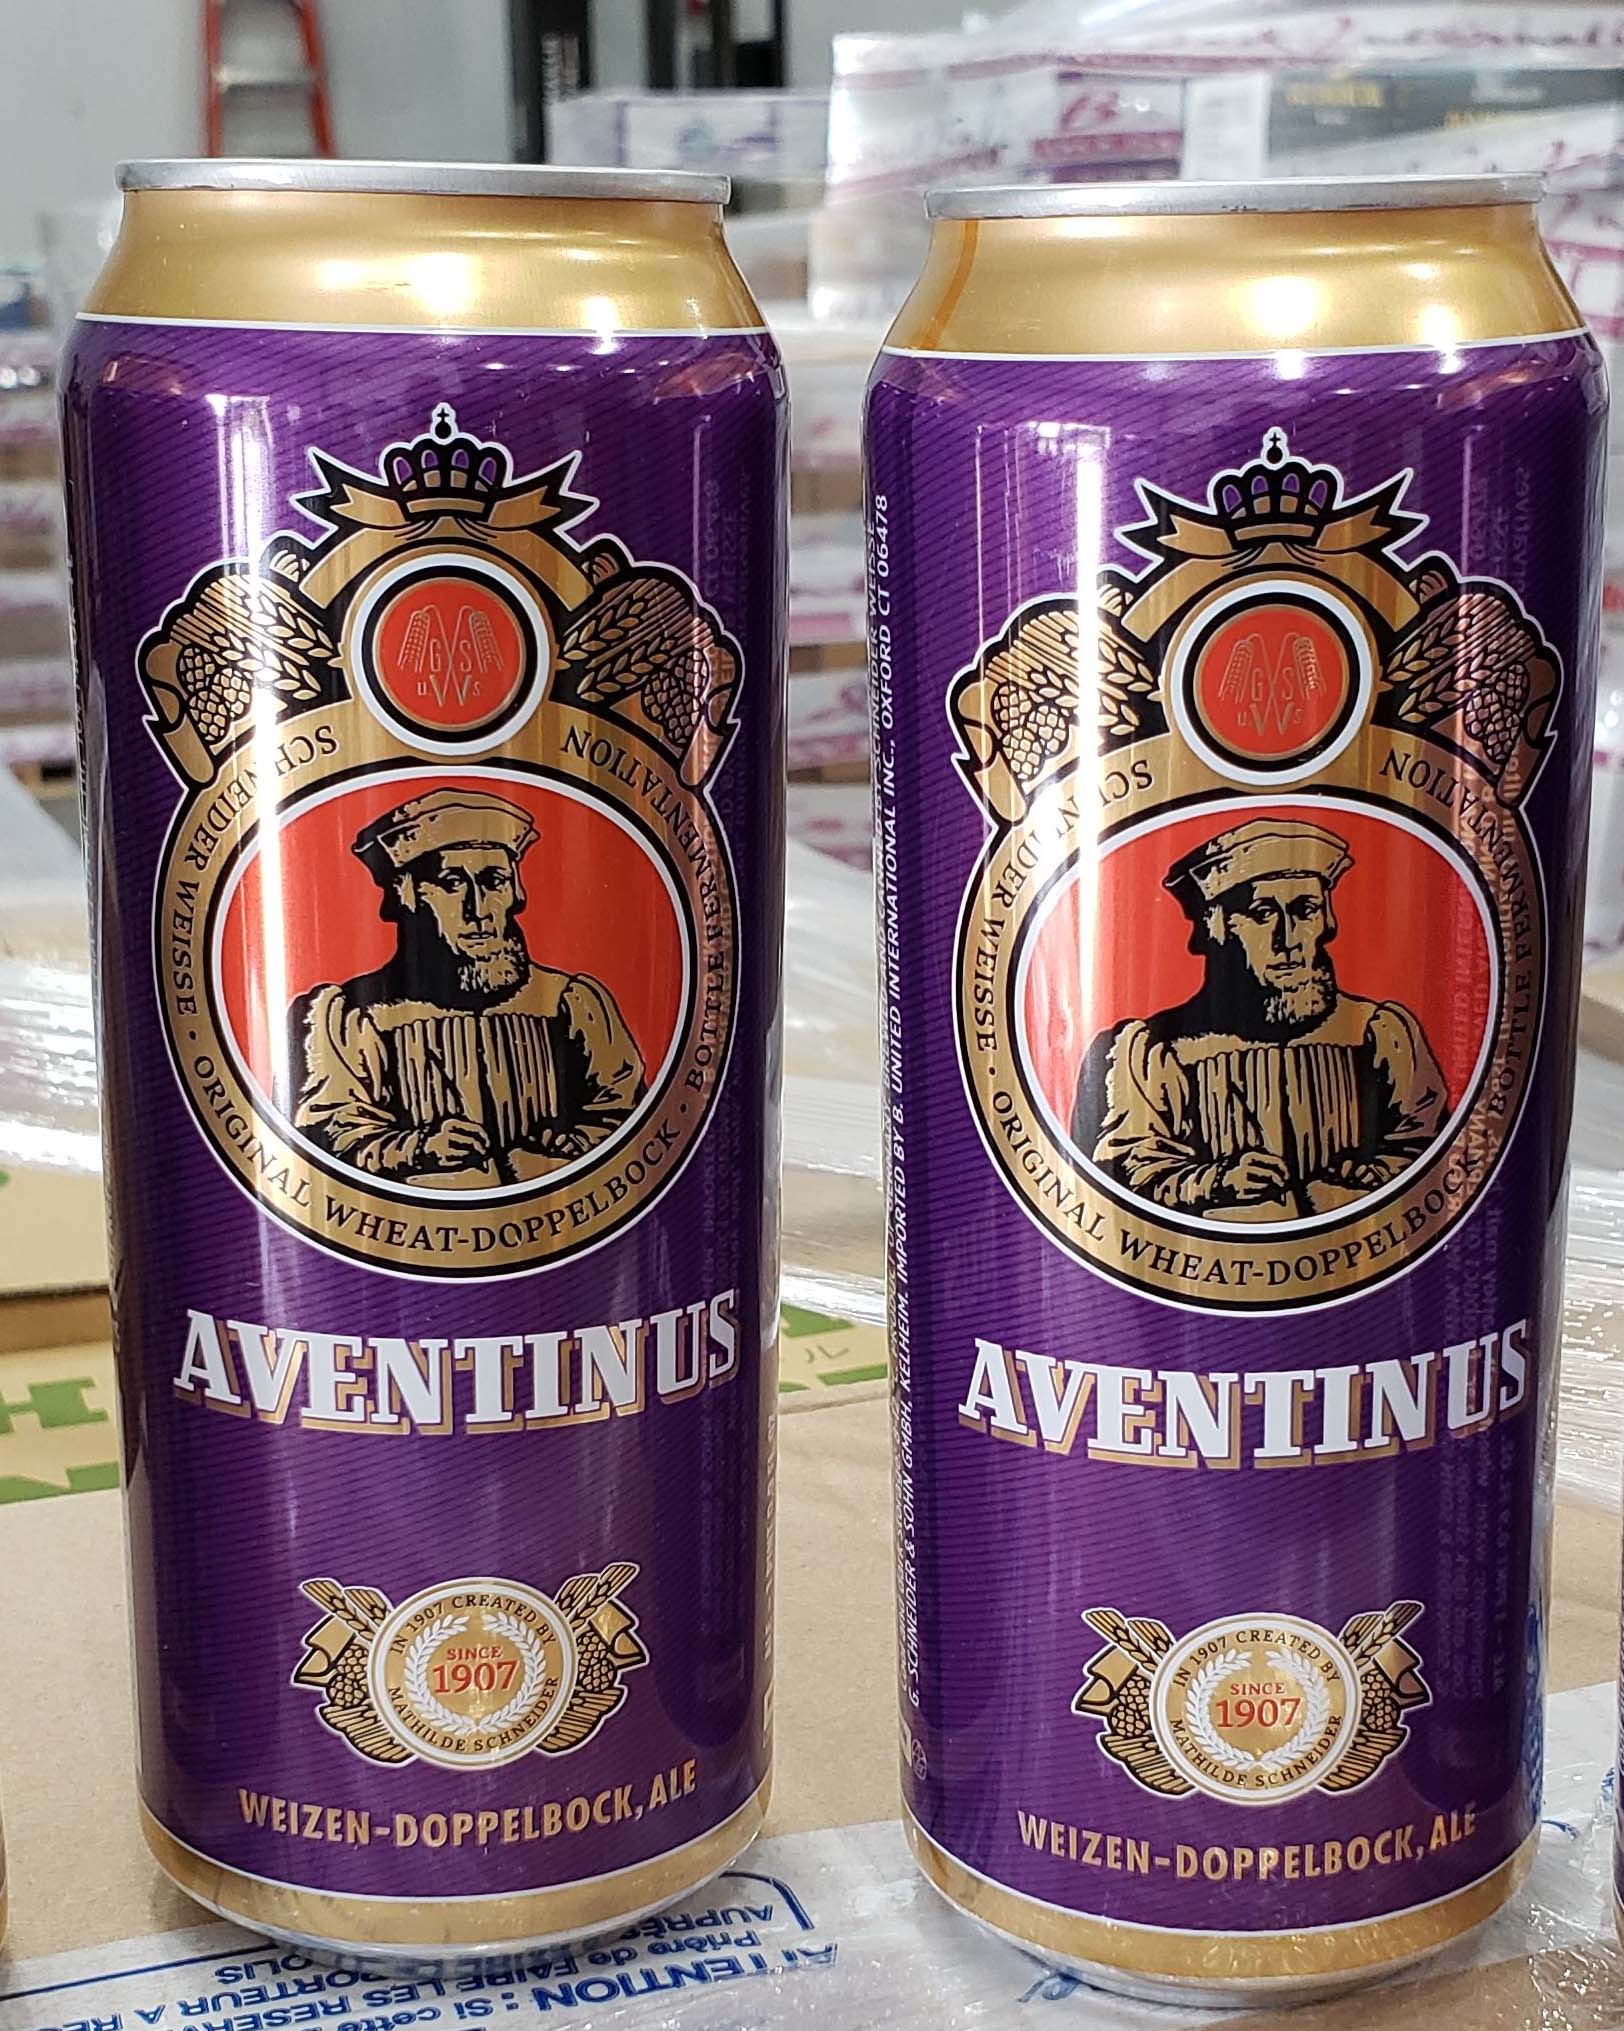 NEW: Aventinus cans